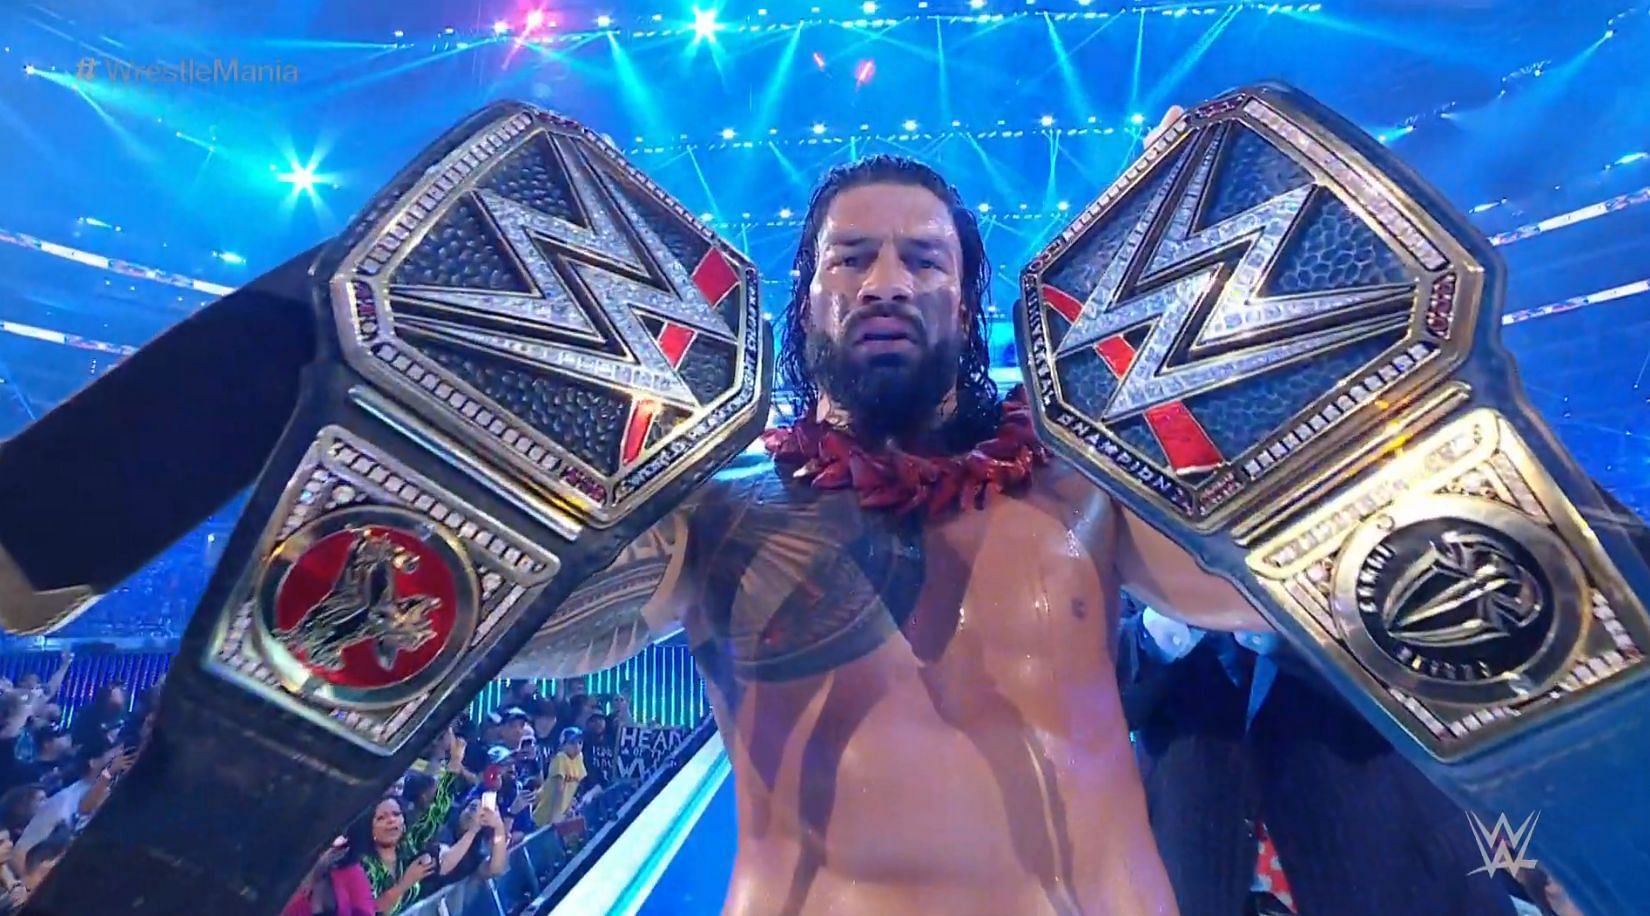 How long will The Tribal Chief reign over WWE with both major titles?